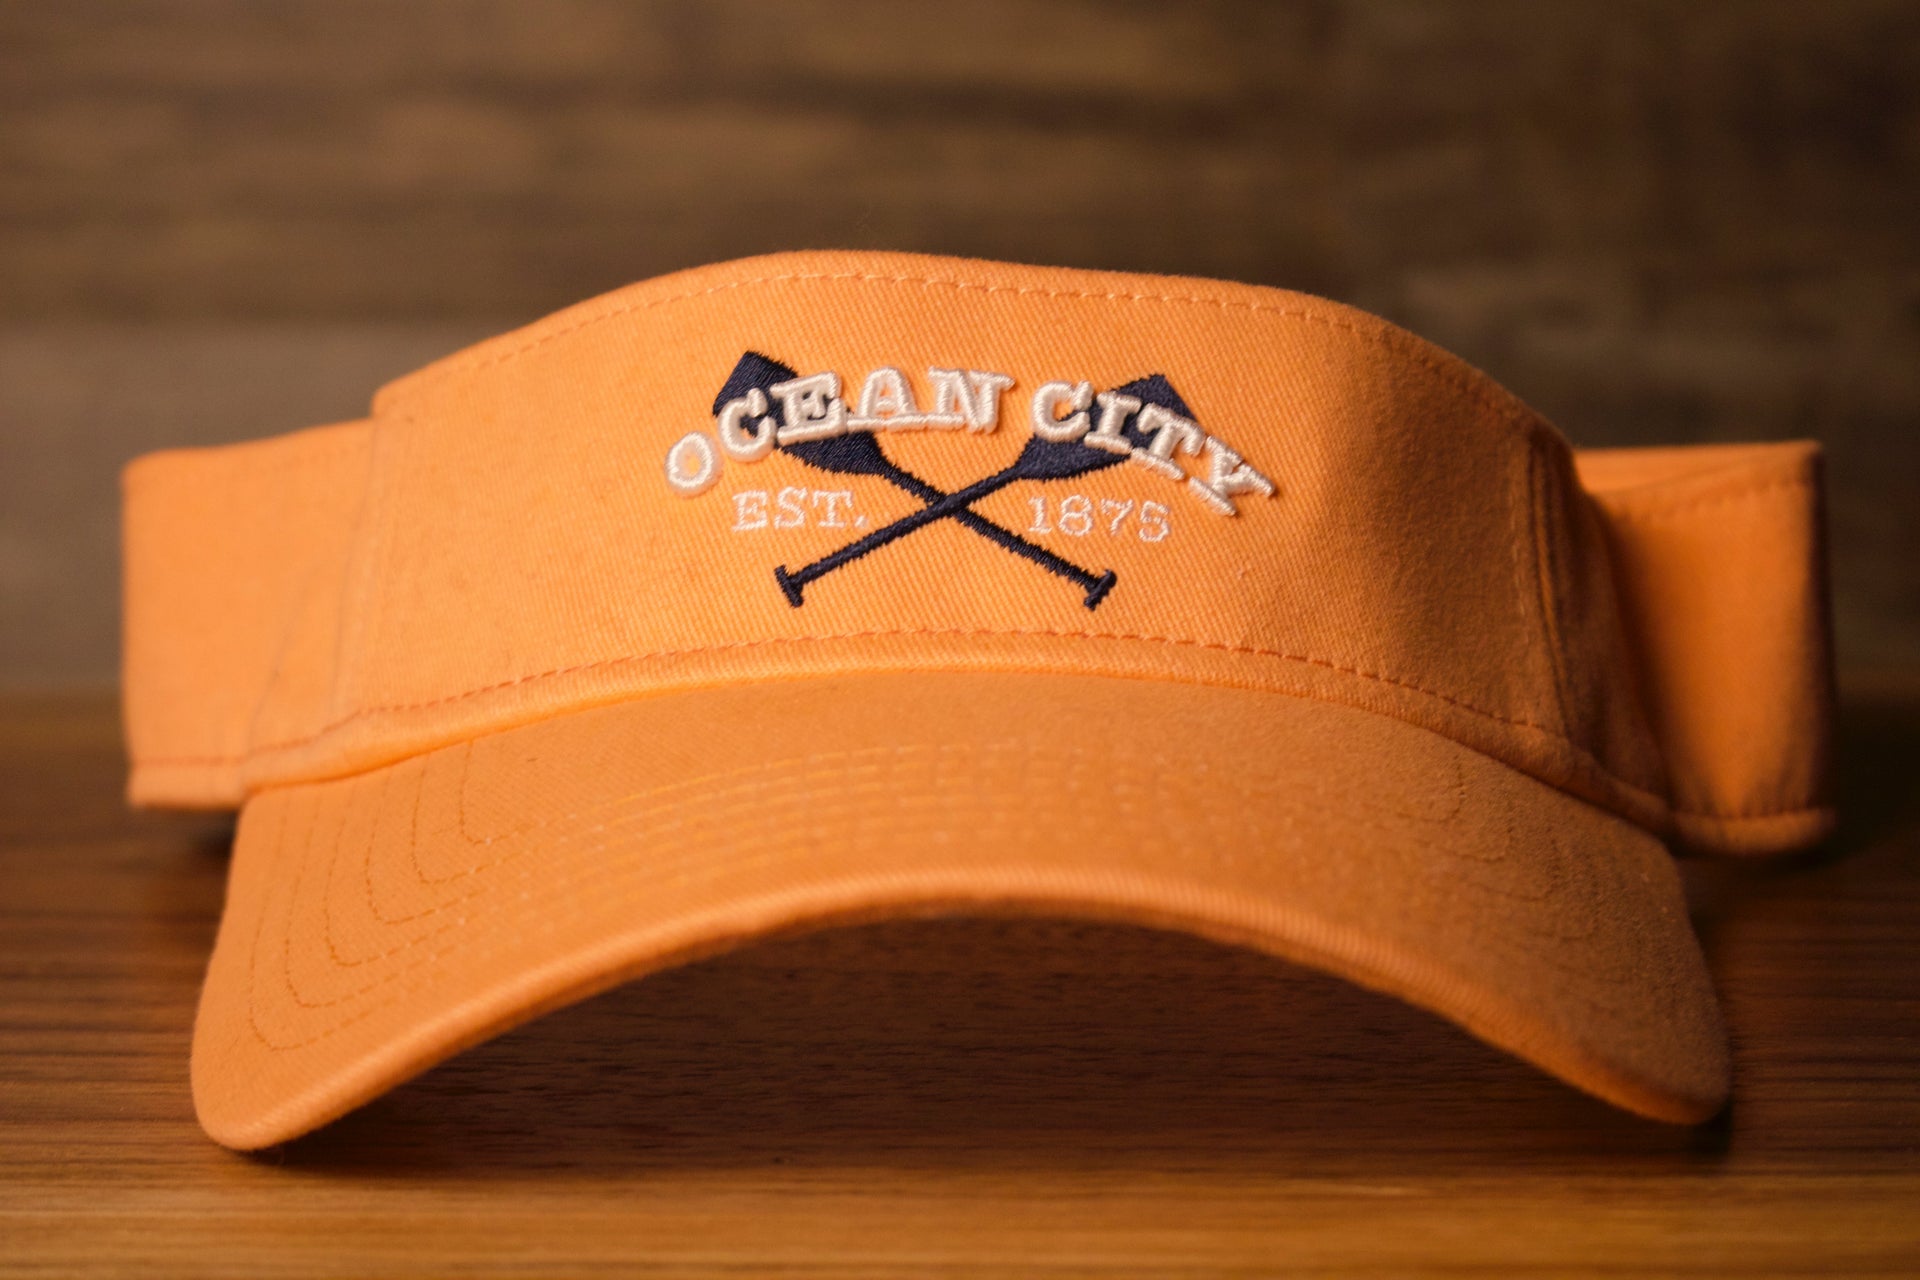 Ocean City Visor | OCNJ Adjustable Visor | Coral Peach | OSFM on the front is ocean city and the year it was founded